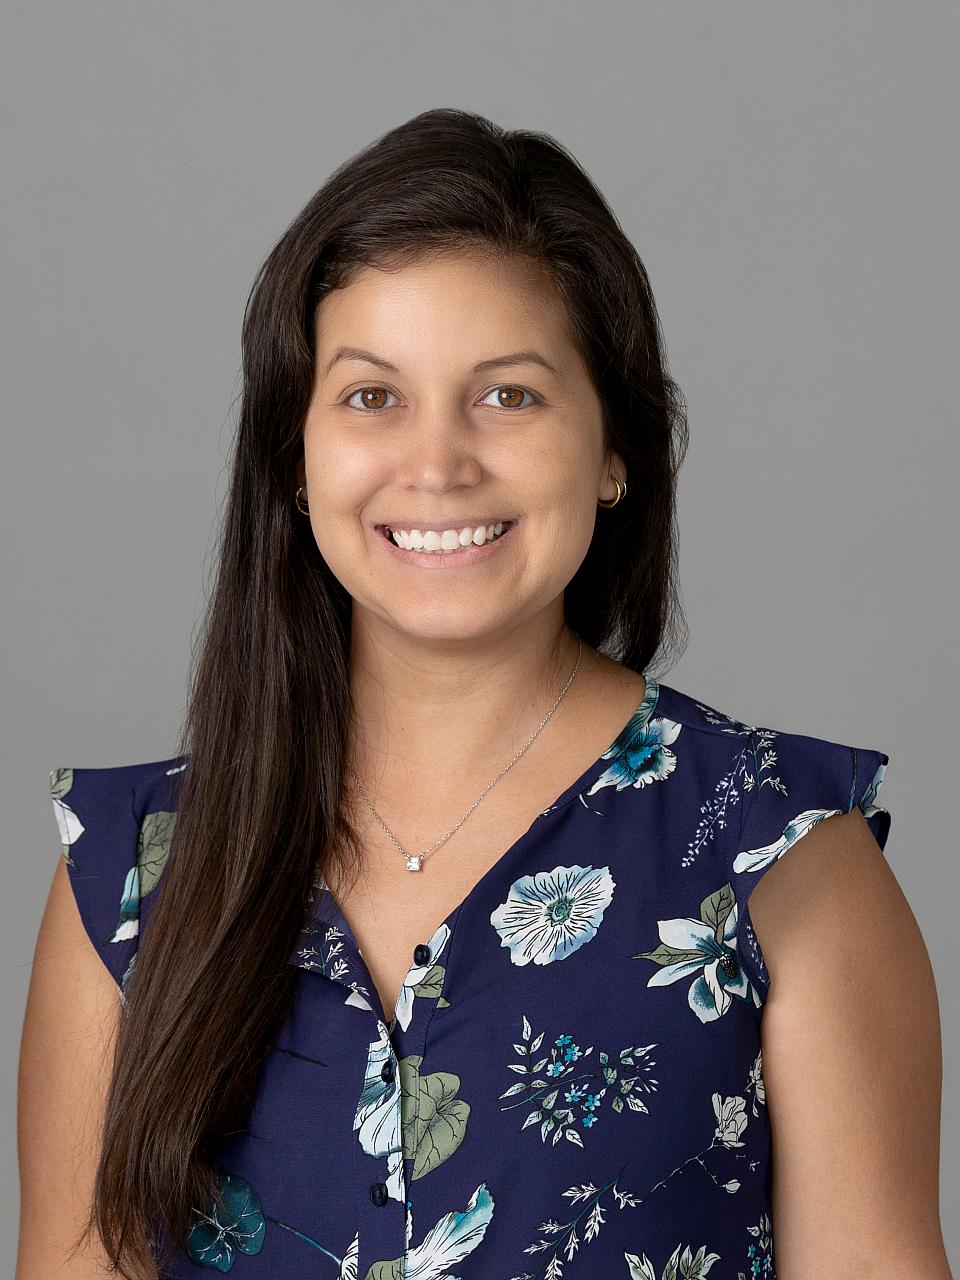 Photo of a woman, Dr. Diana Melo, with long dark hair wearing a floral shirt smiling at the camera.